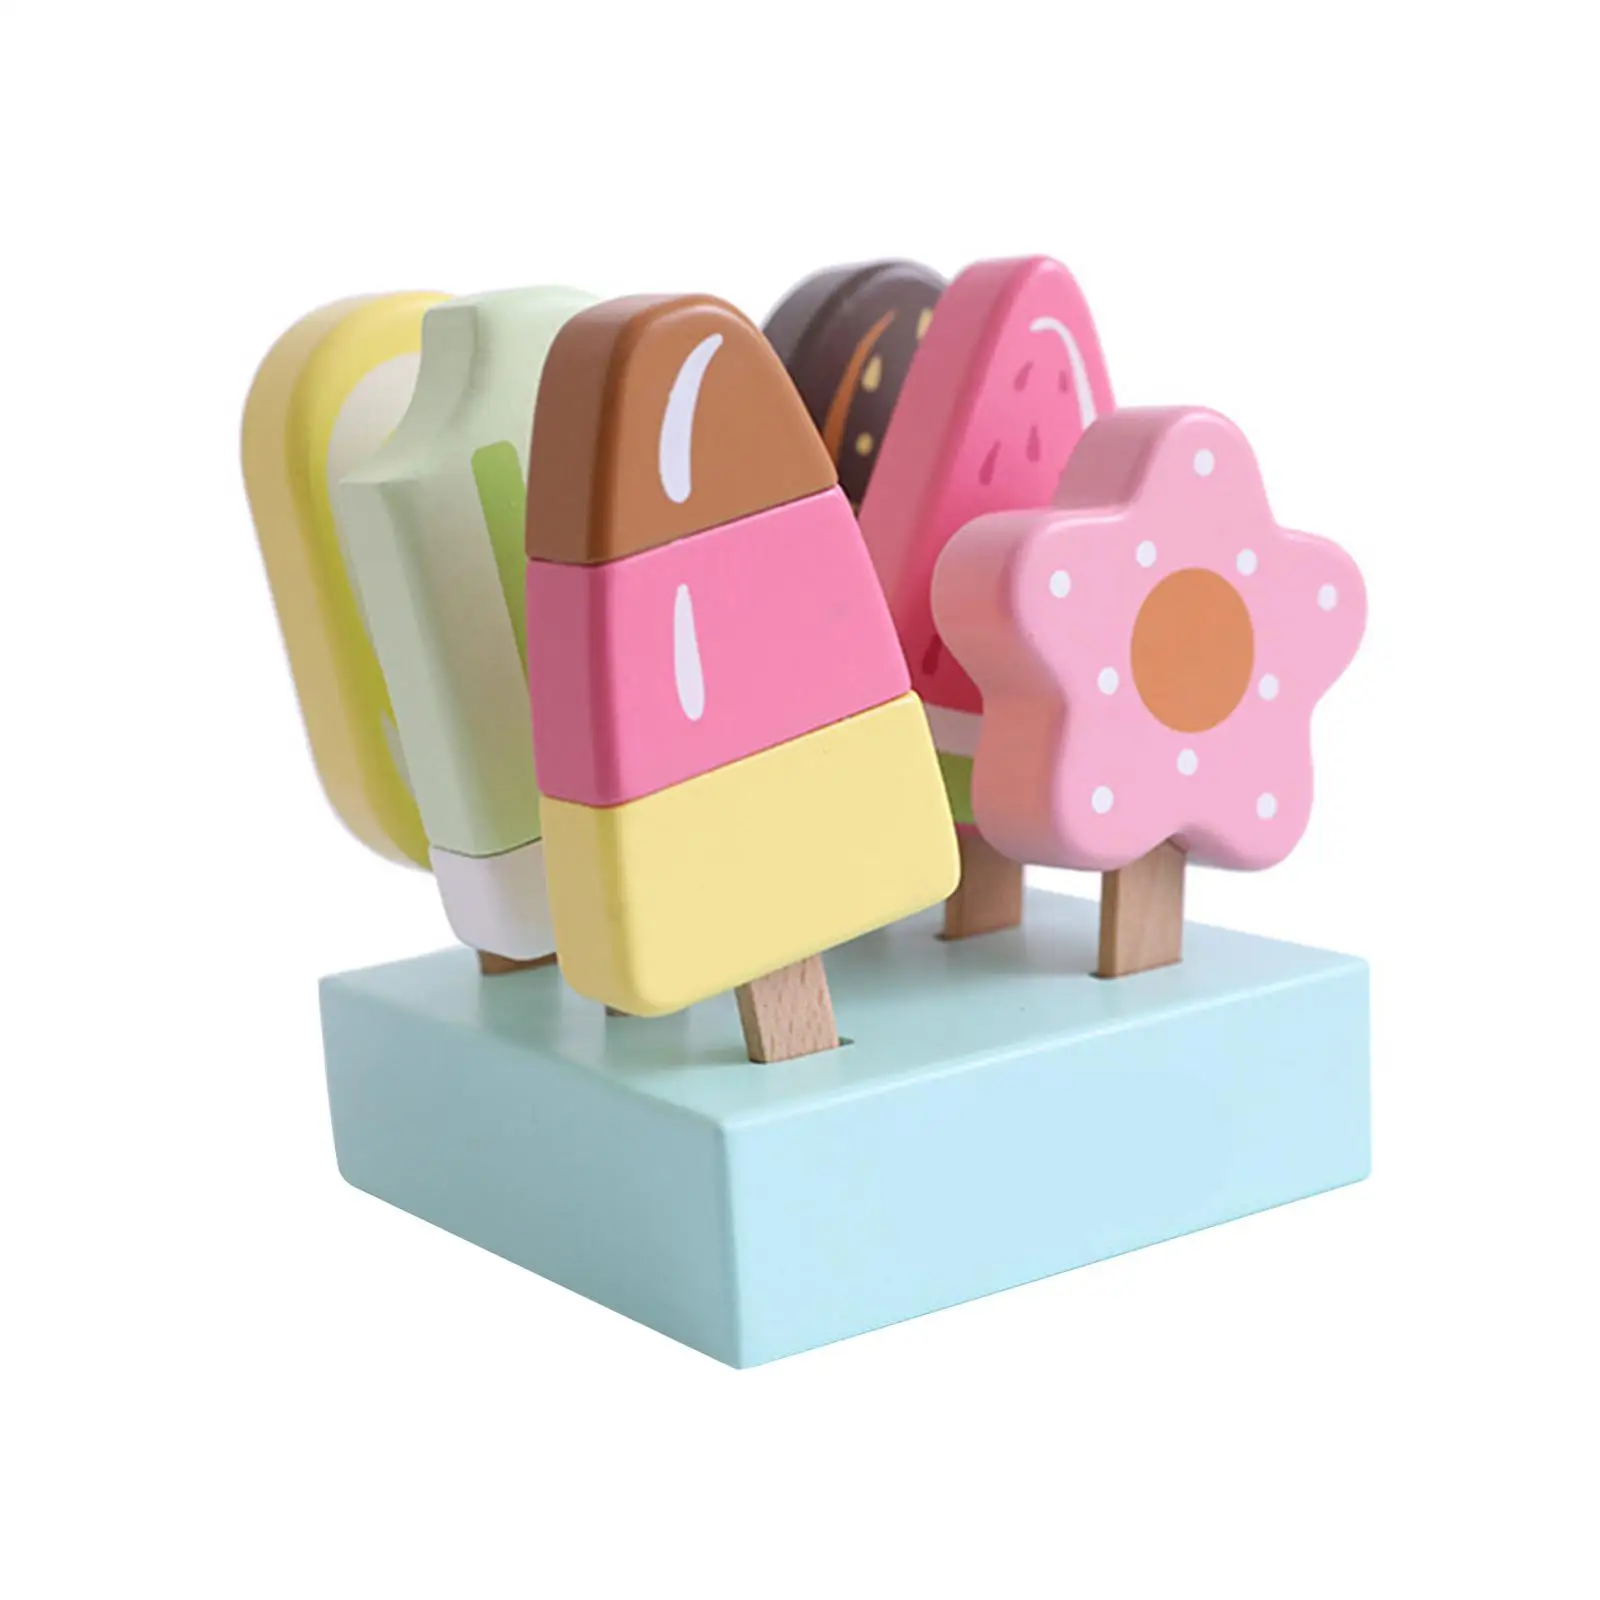 Ice Cream Toy, Fake Ice Cream with Wooden Popsicle, Montessori Simulation Ice Cream Pretend Play for Kids Boys Holiday Gifts